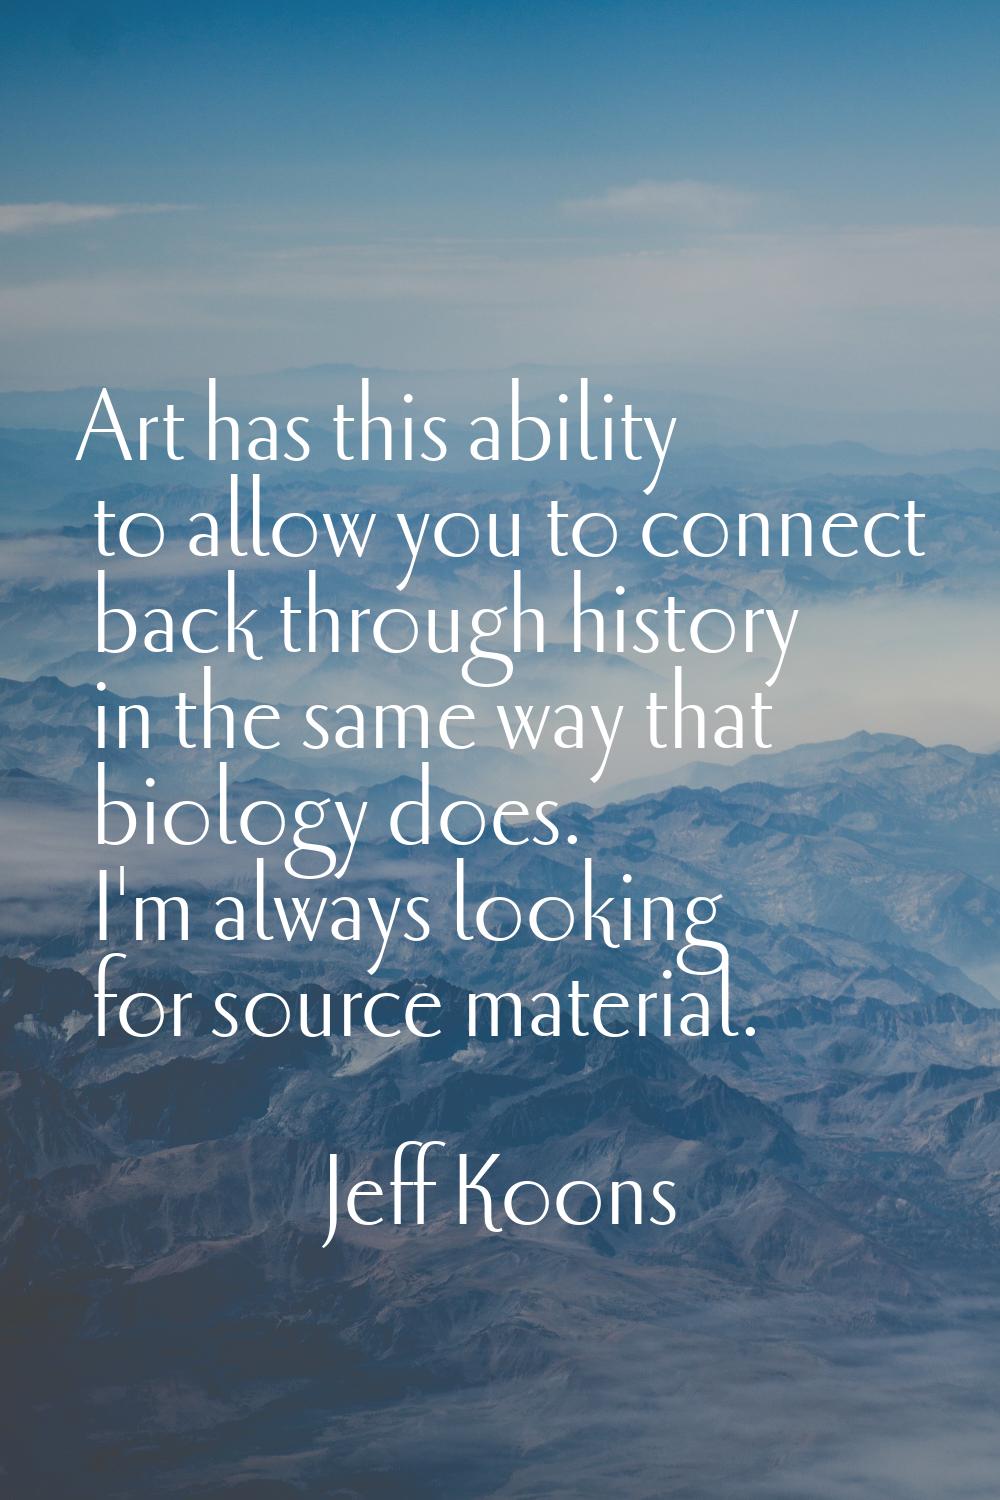 Art has this ability to allow you to connect back through history in the same way that biology does